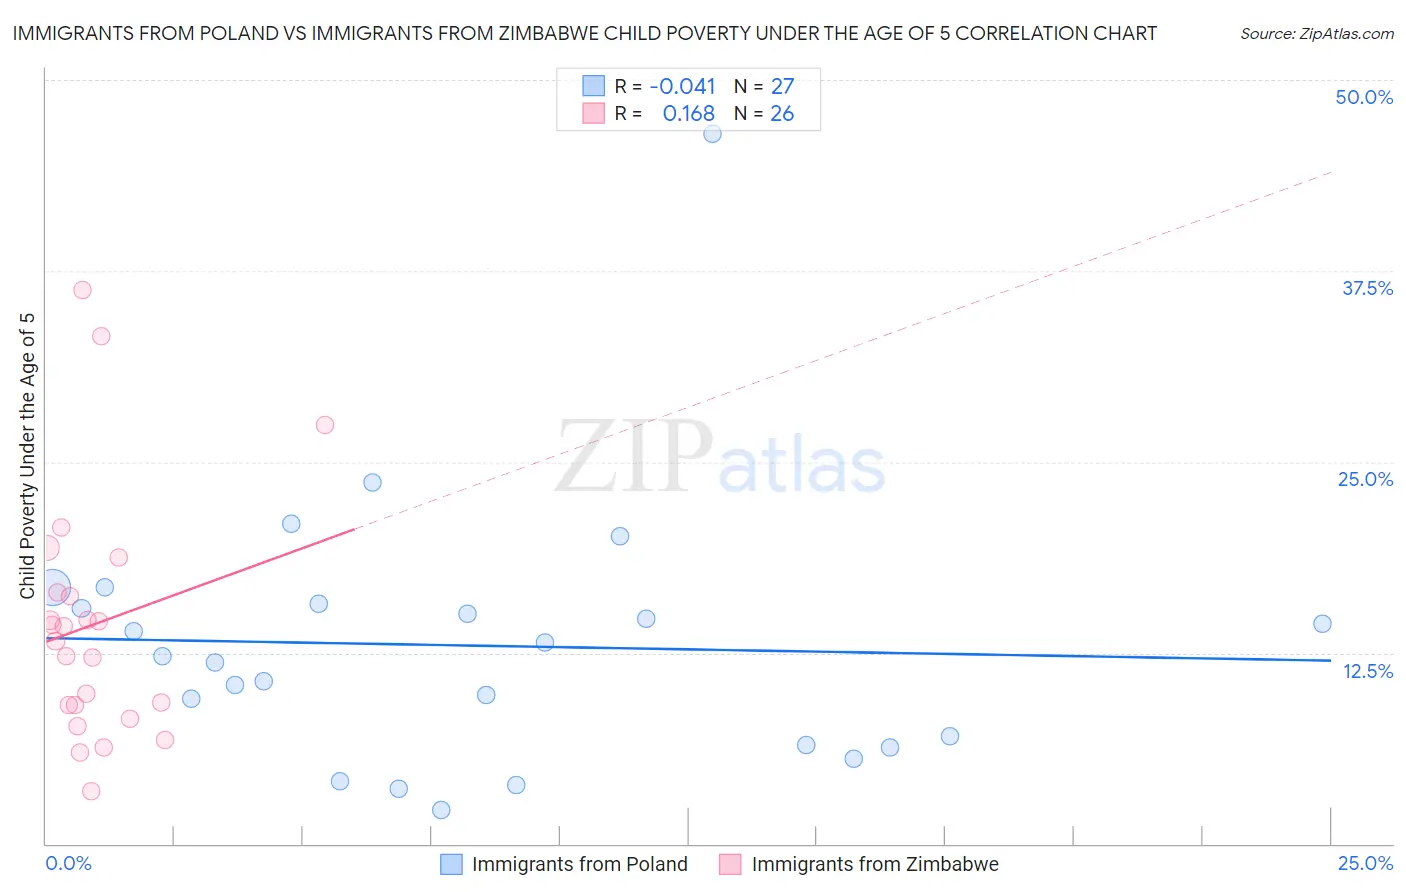 Immigrants from Poland vs Immigrants from Zimbabwe Child Poverty Under the Age of 5